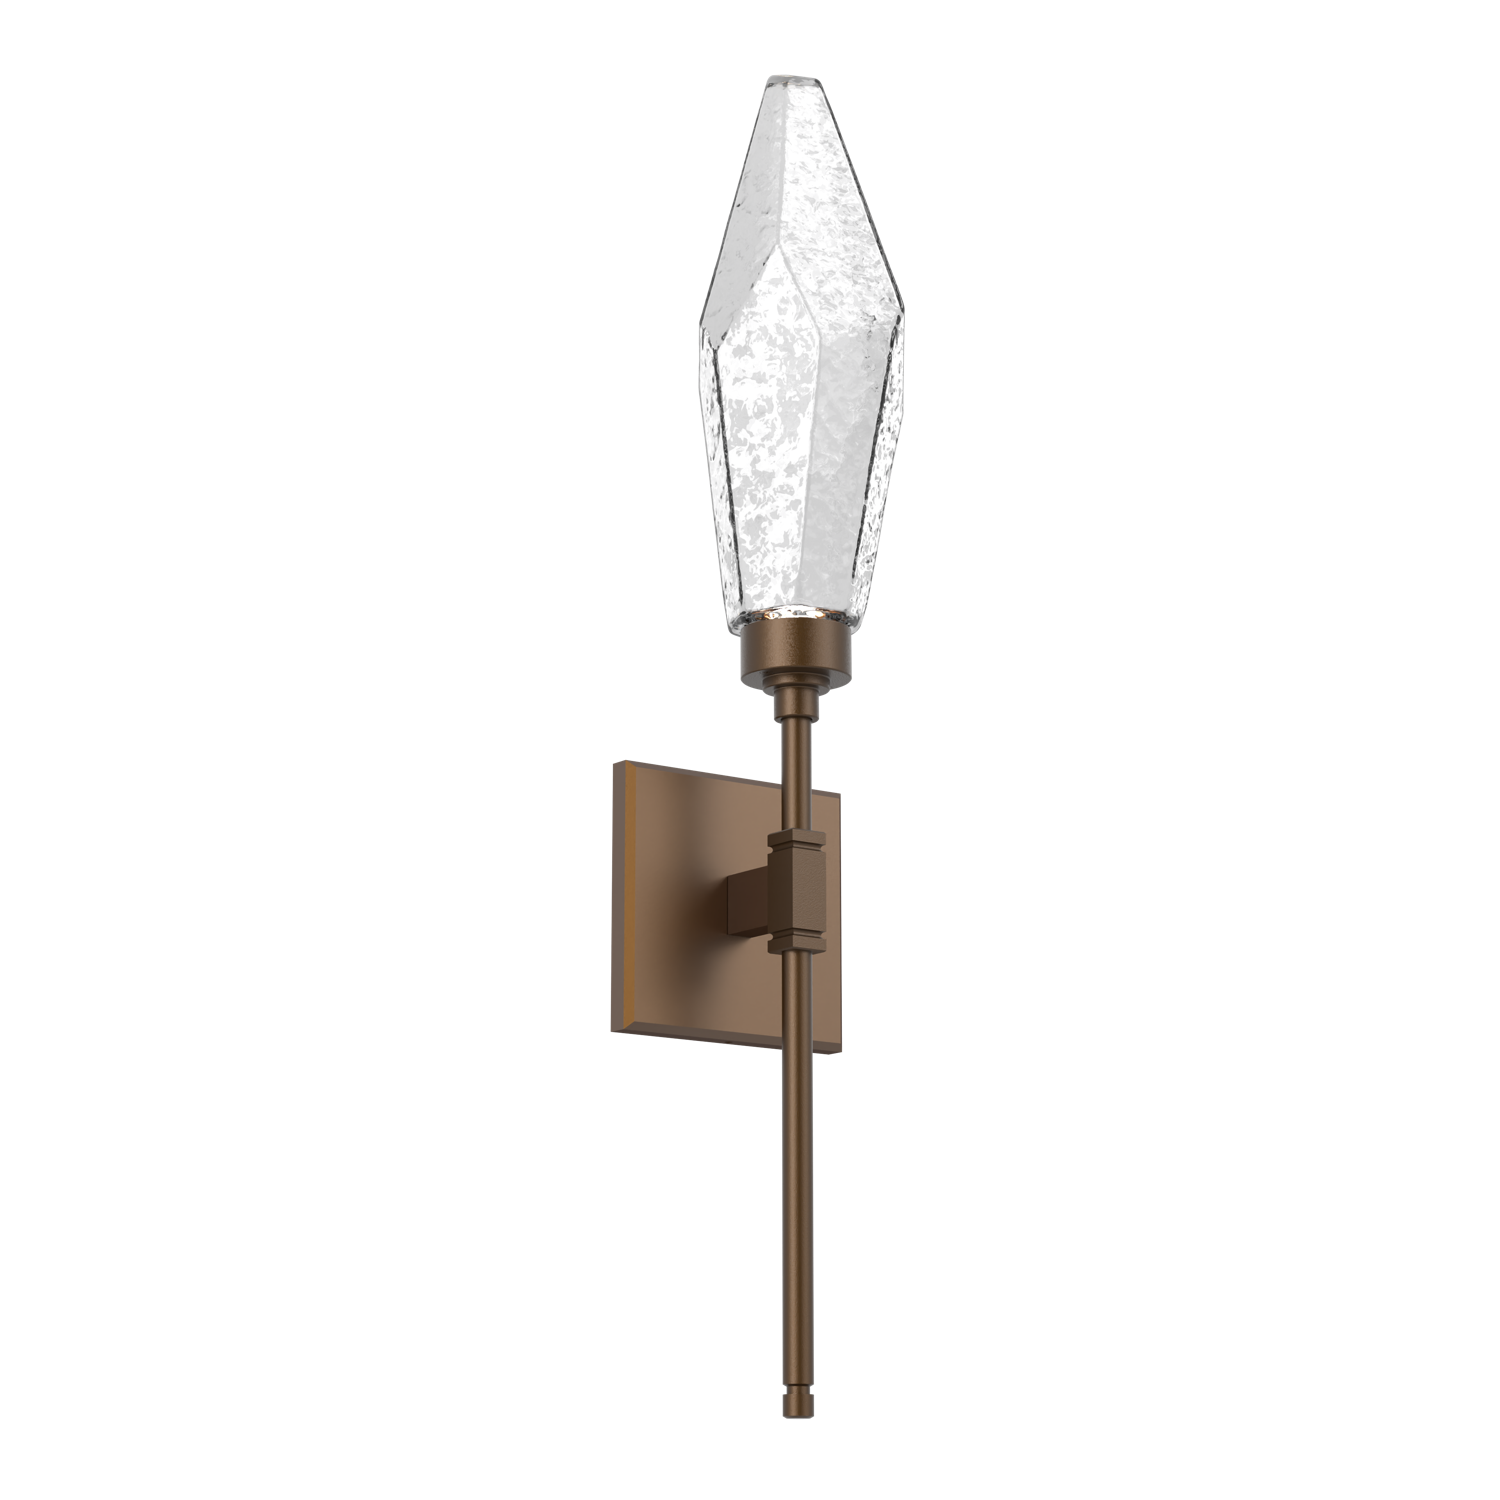 IDB0050-04-FB-CC-Hammerton-Studio-Rock-Crystal-ada-certified-belvedere-wall-sconce-with-flat-bronze-finish-and-clear-glass-shades-and-LED-lamping